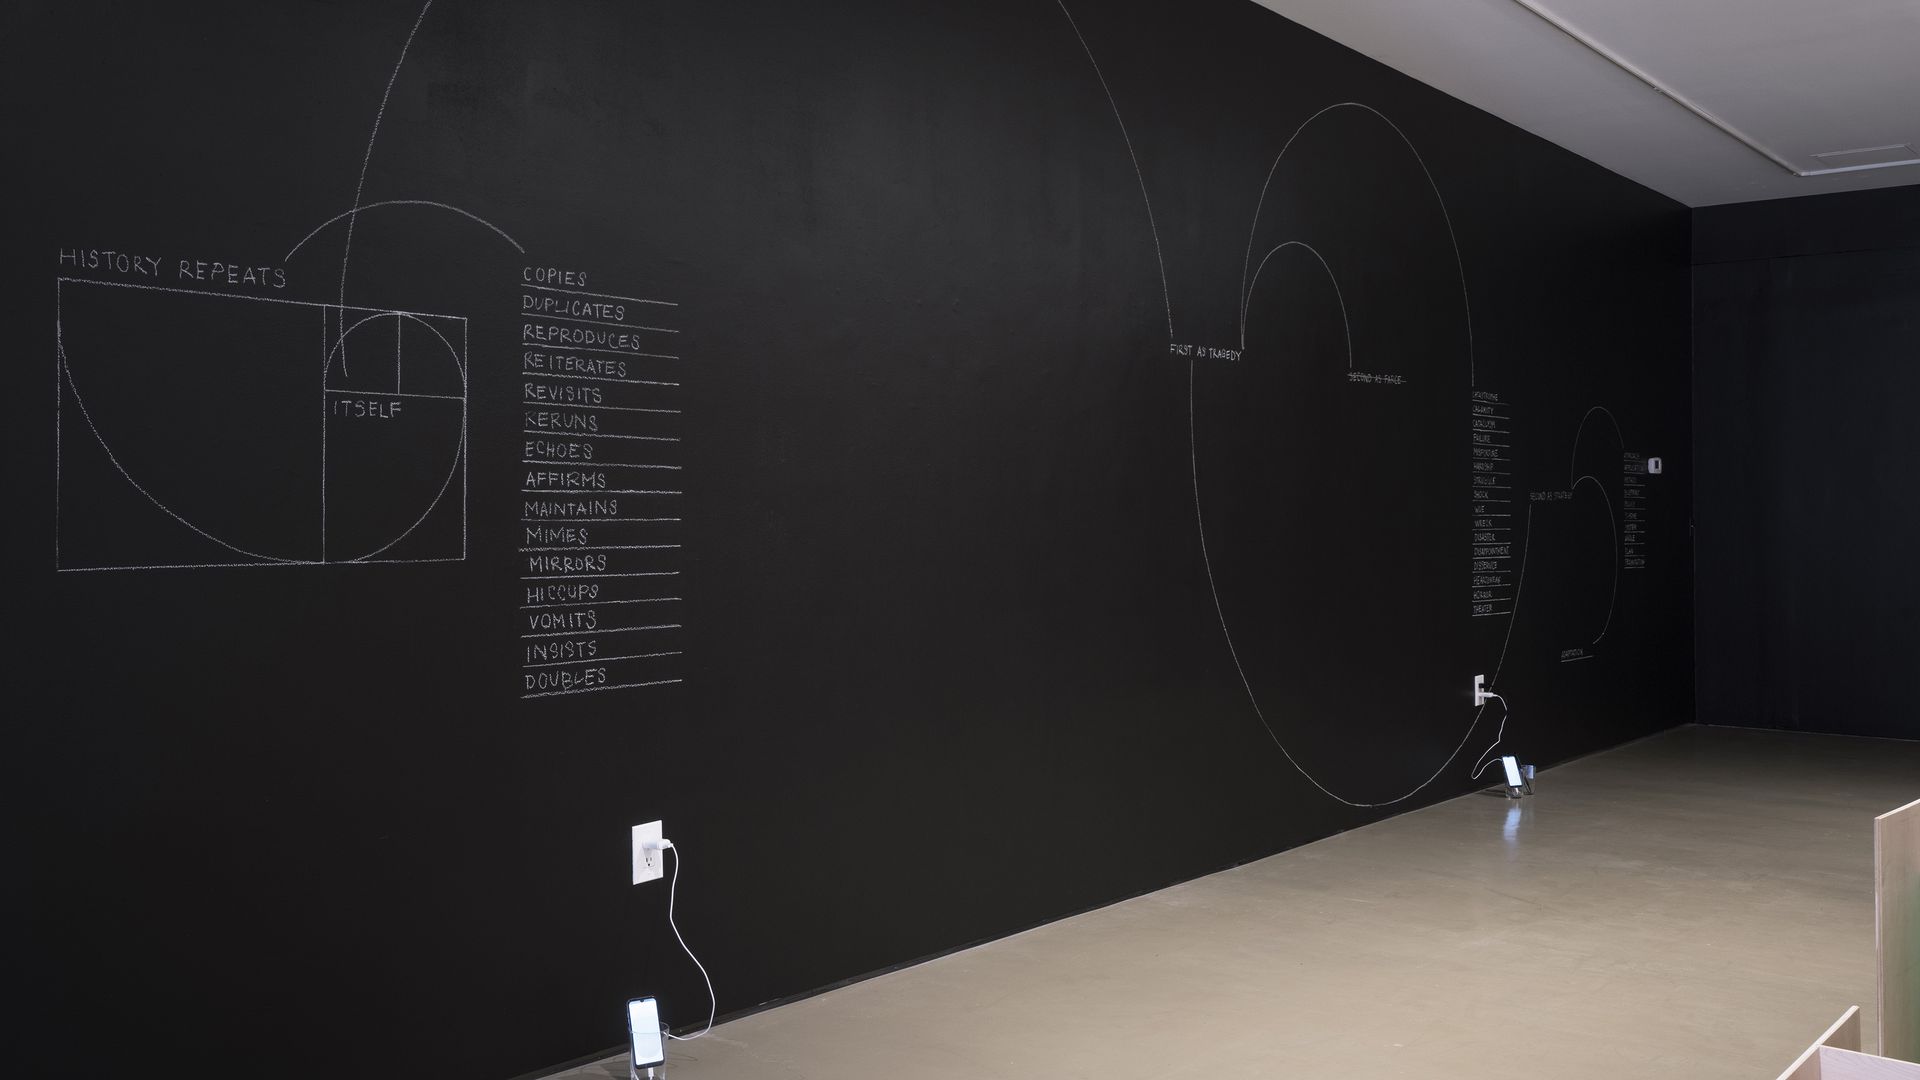 A photo of an art installation at the ICA, it is white outlines on a black wall